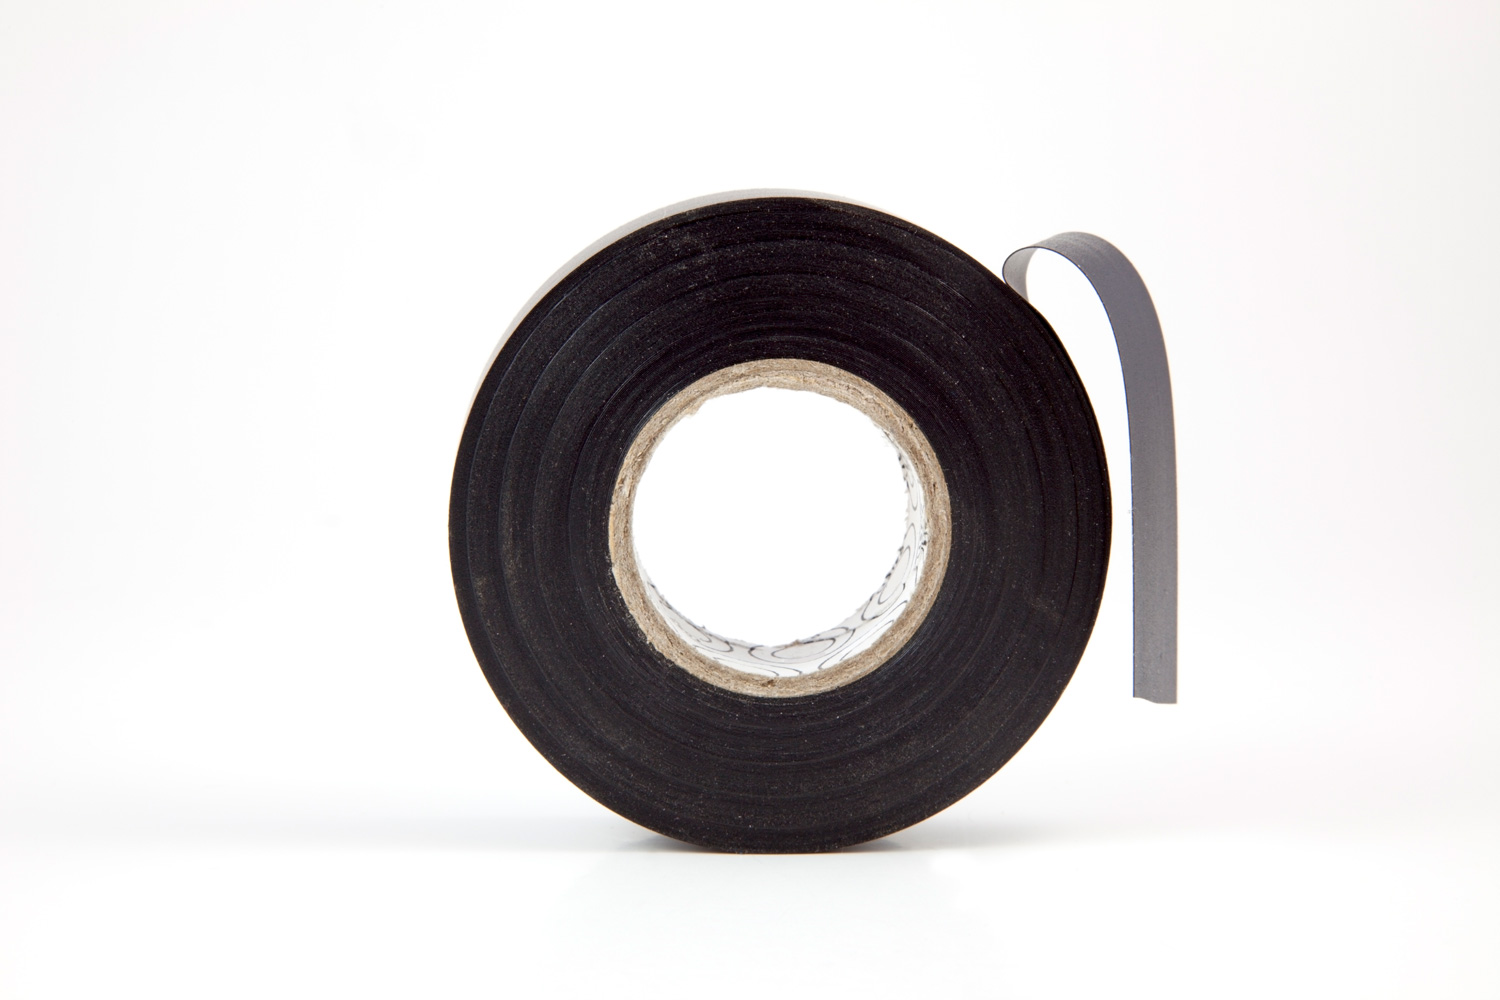 Roll of black electrical tape. Horizontal.